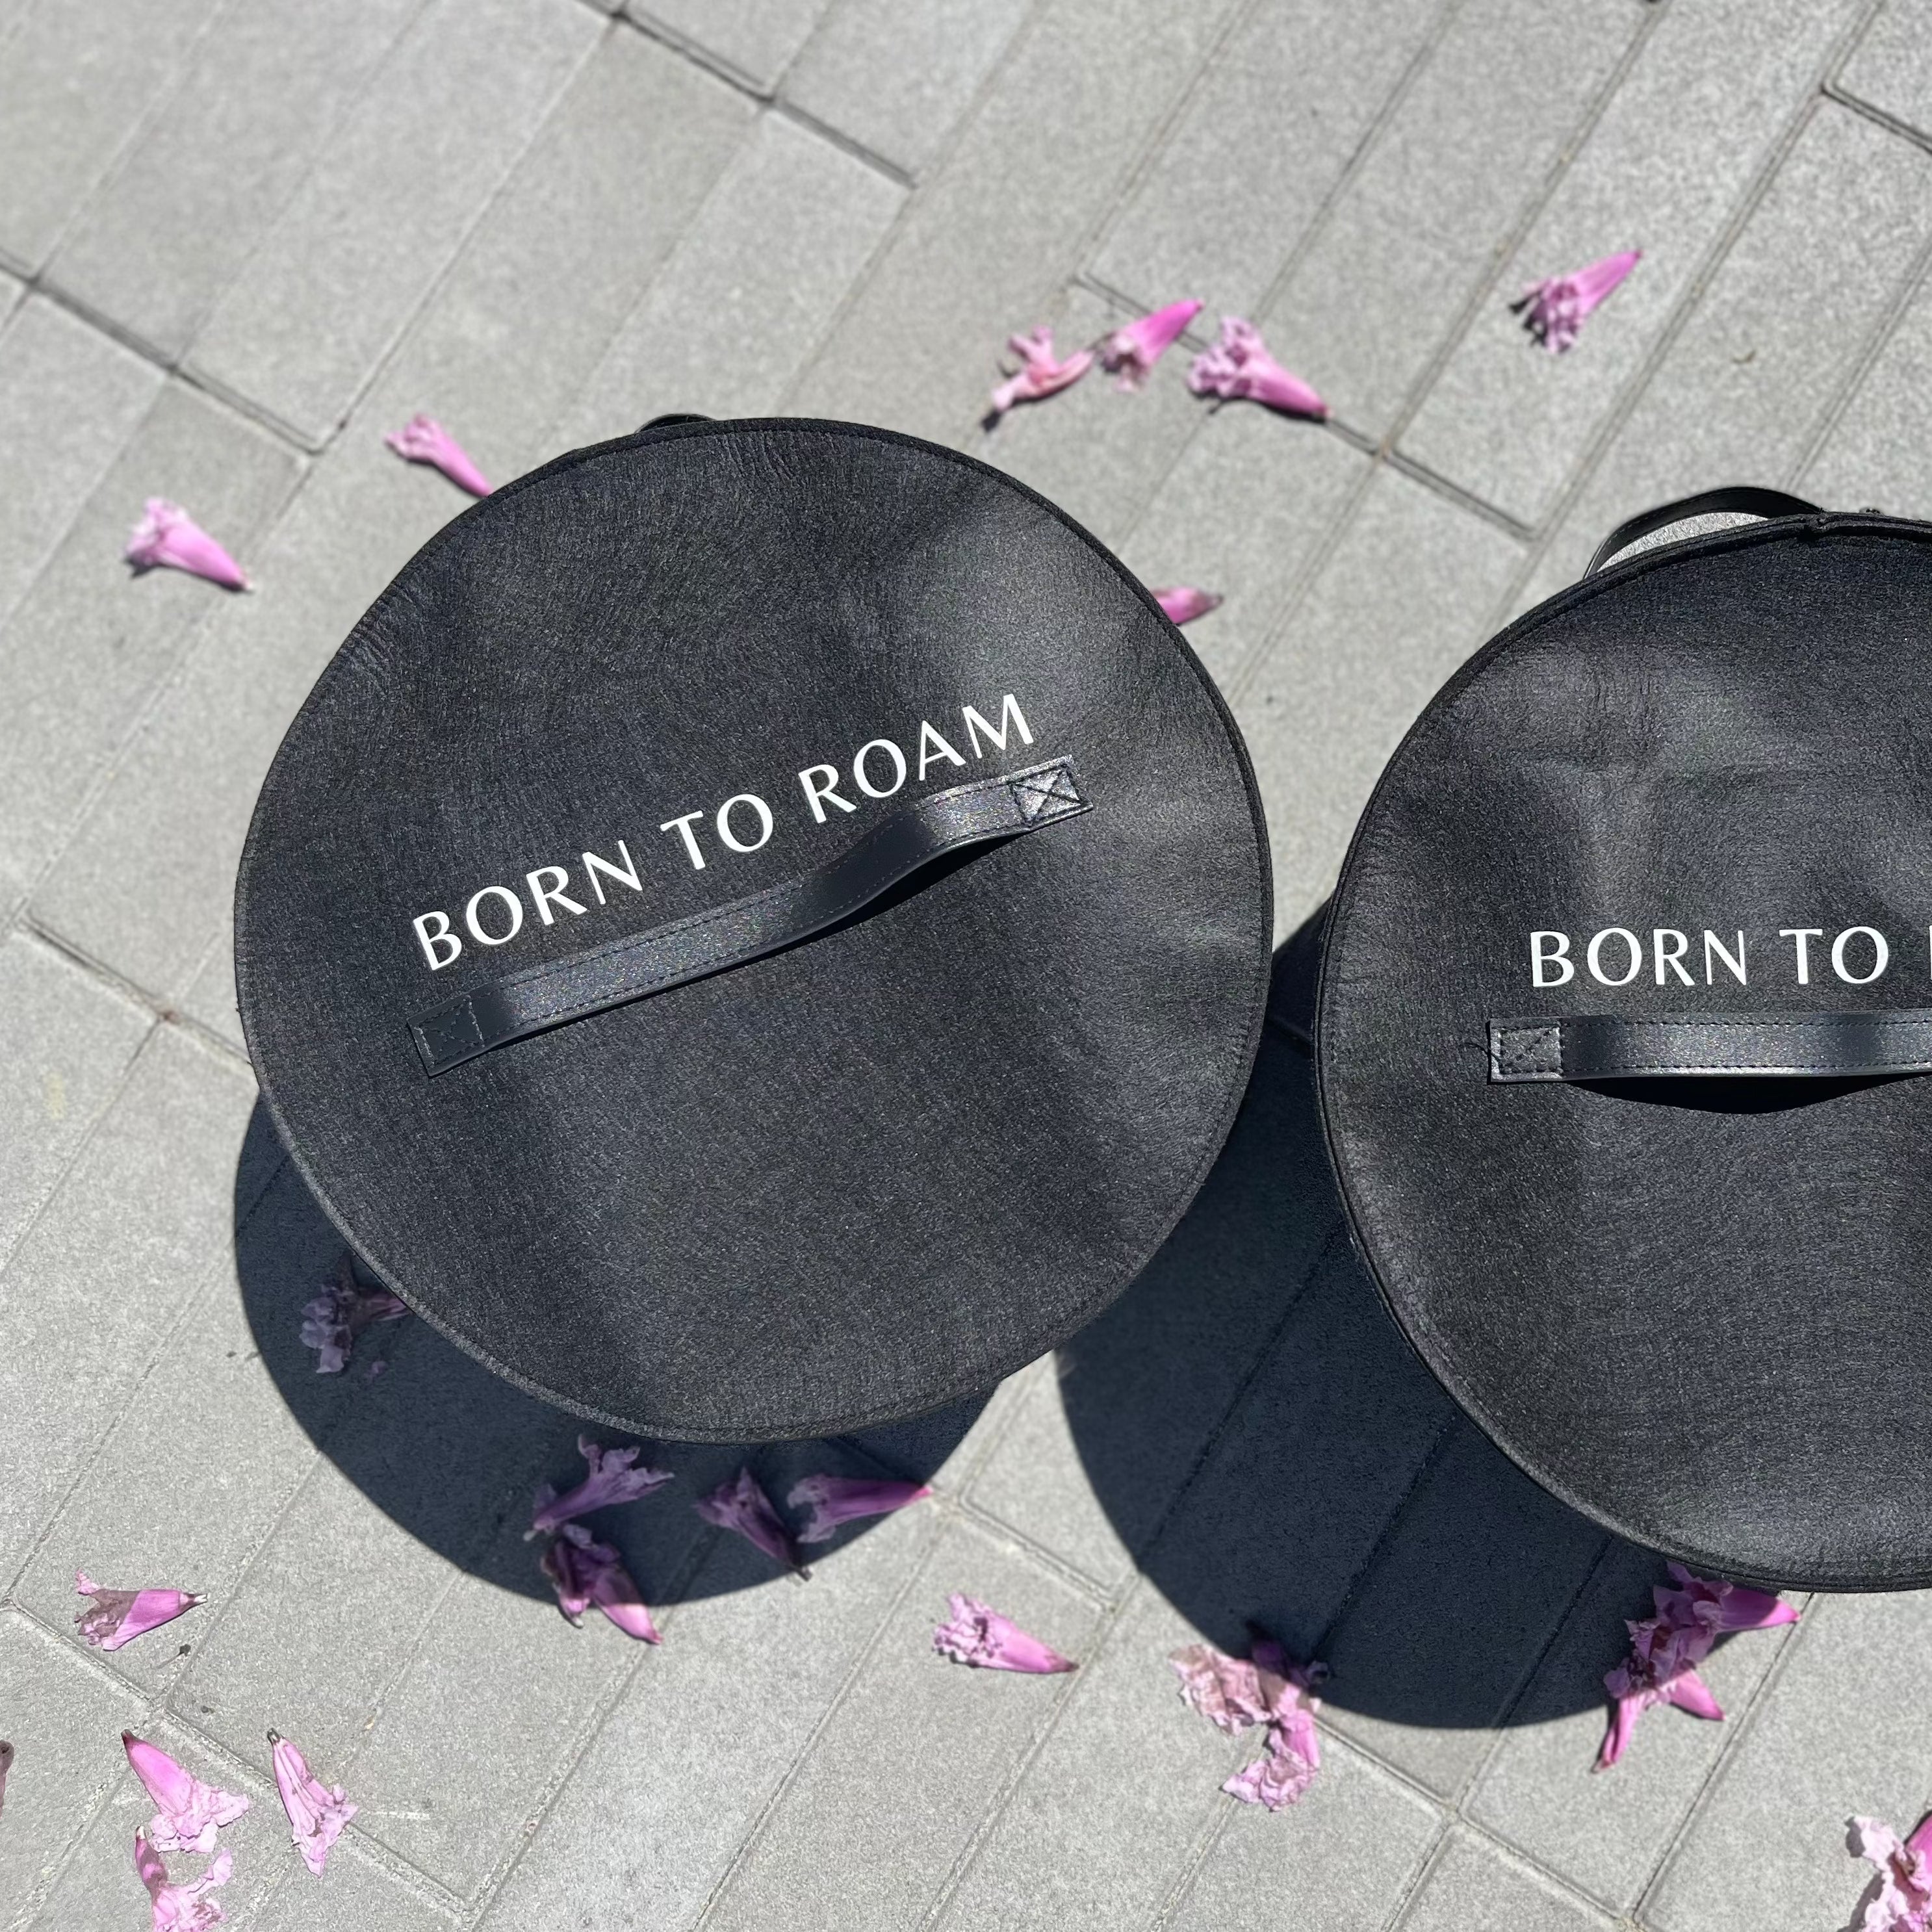 Carry your wanderlust with Born to Roam hat luggage